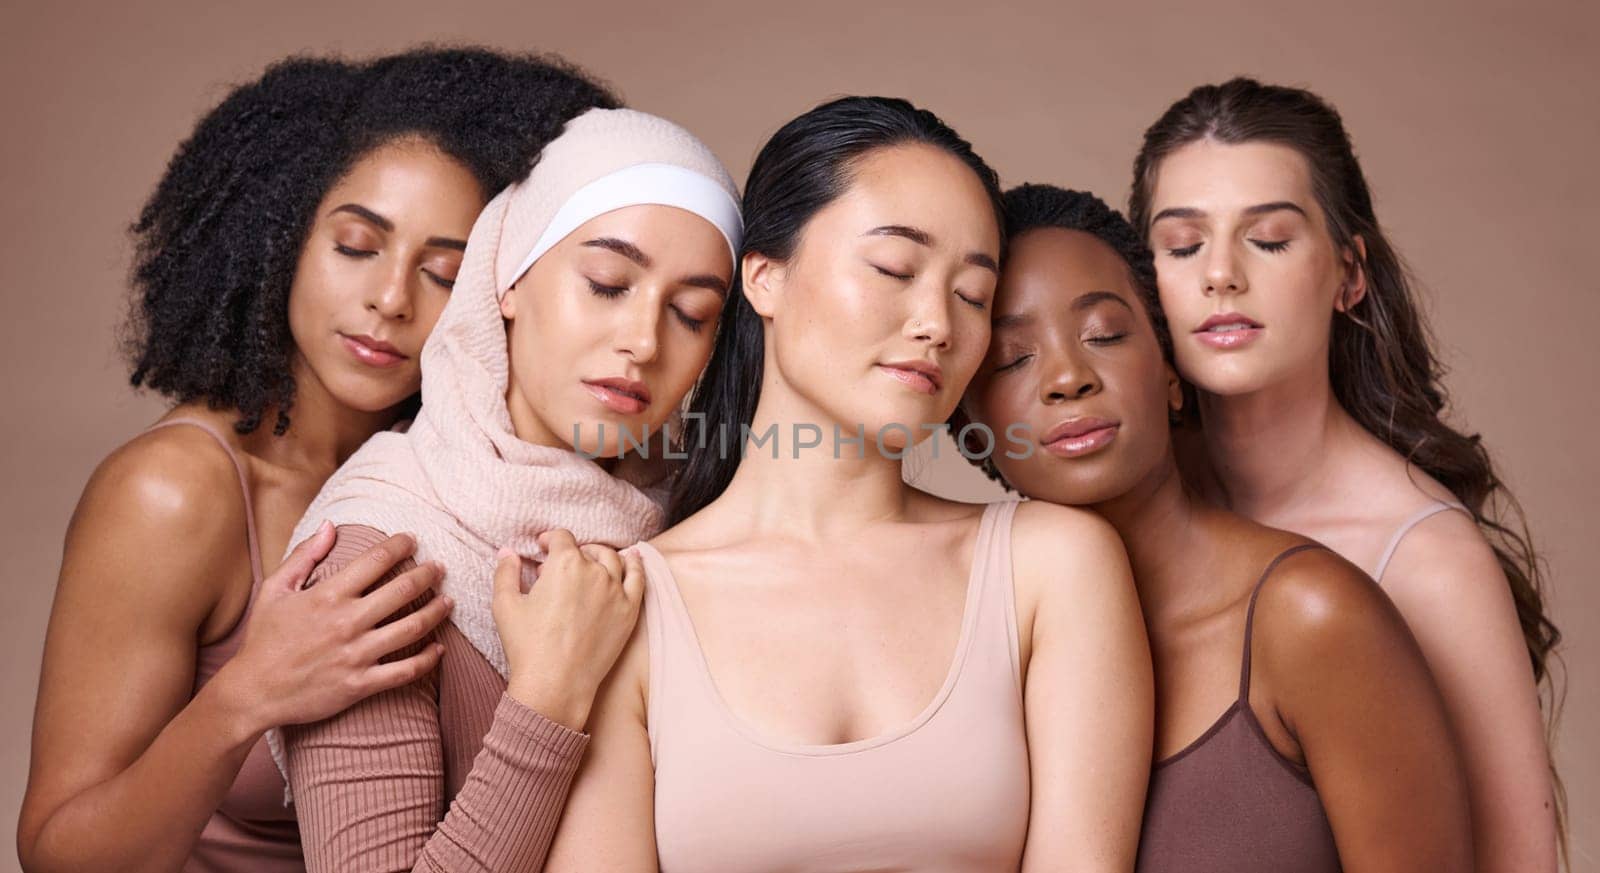 Women, diversity and relax global model group feeling calm about skincare, beauty and skin glow. Cosmetic, facial and dermatology wellness of models resting together showing cosmetics community.